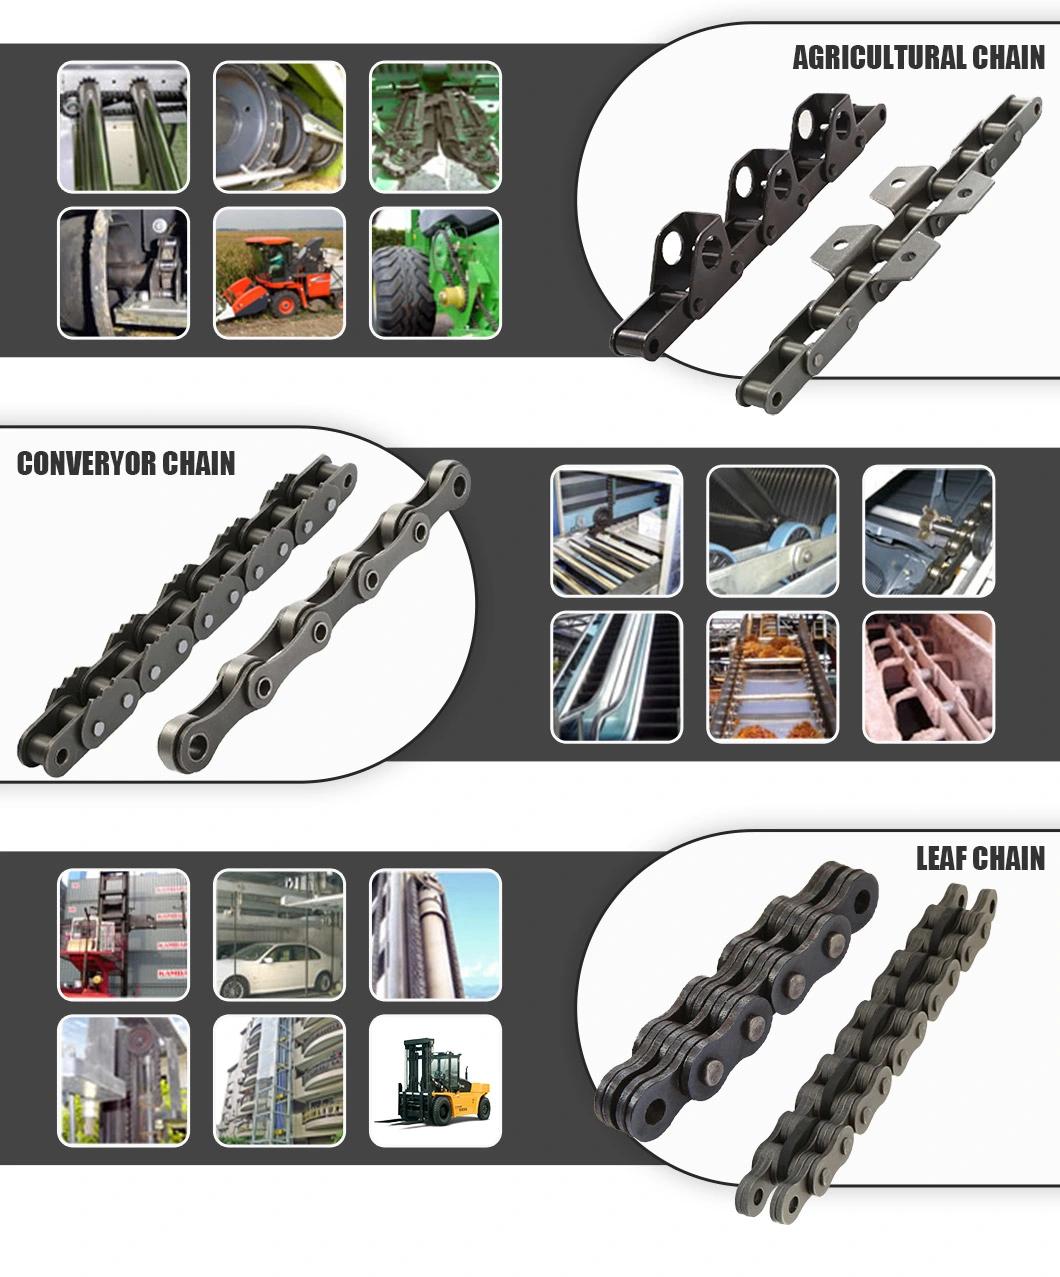 Drop Forged Rivetless Chain with Competitive Price (998)